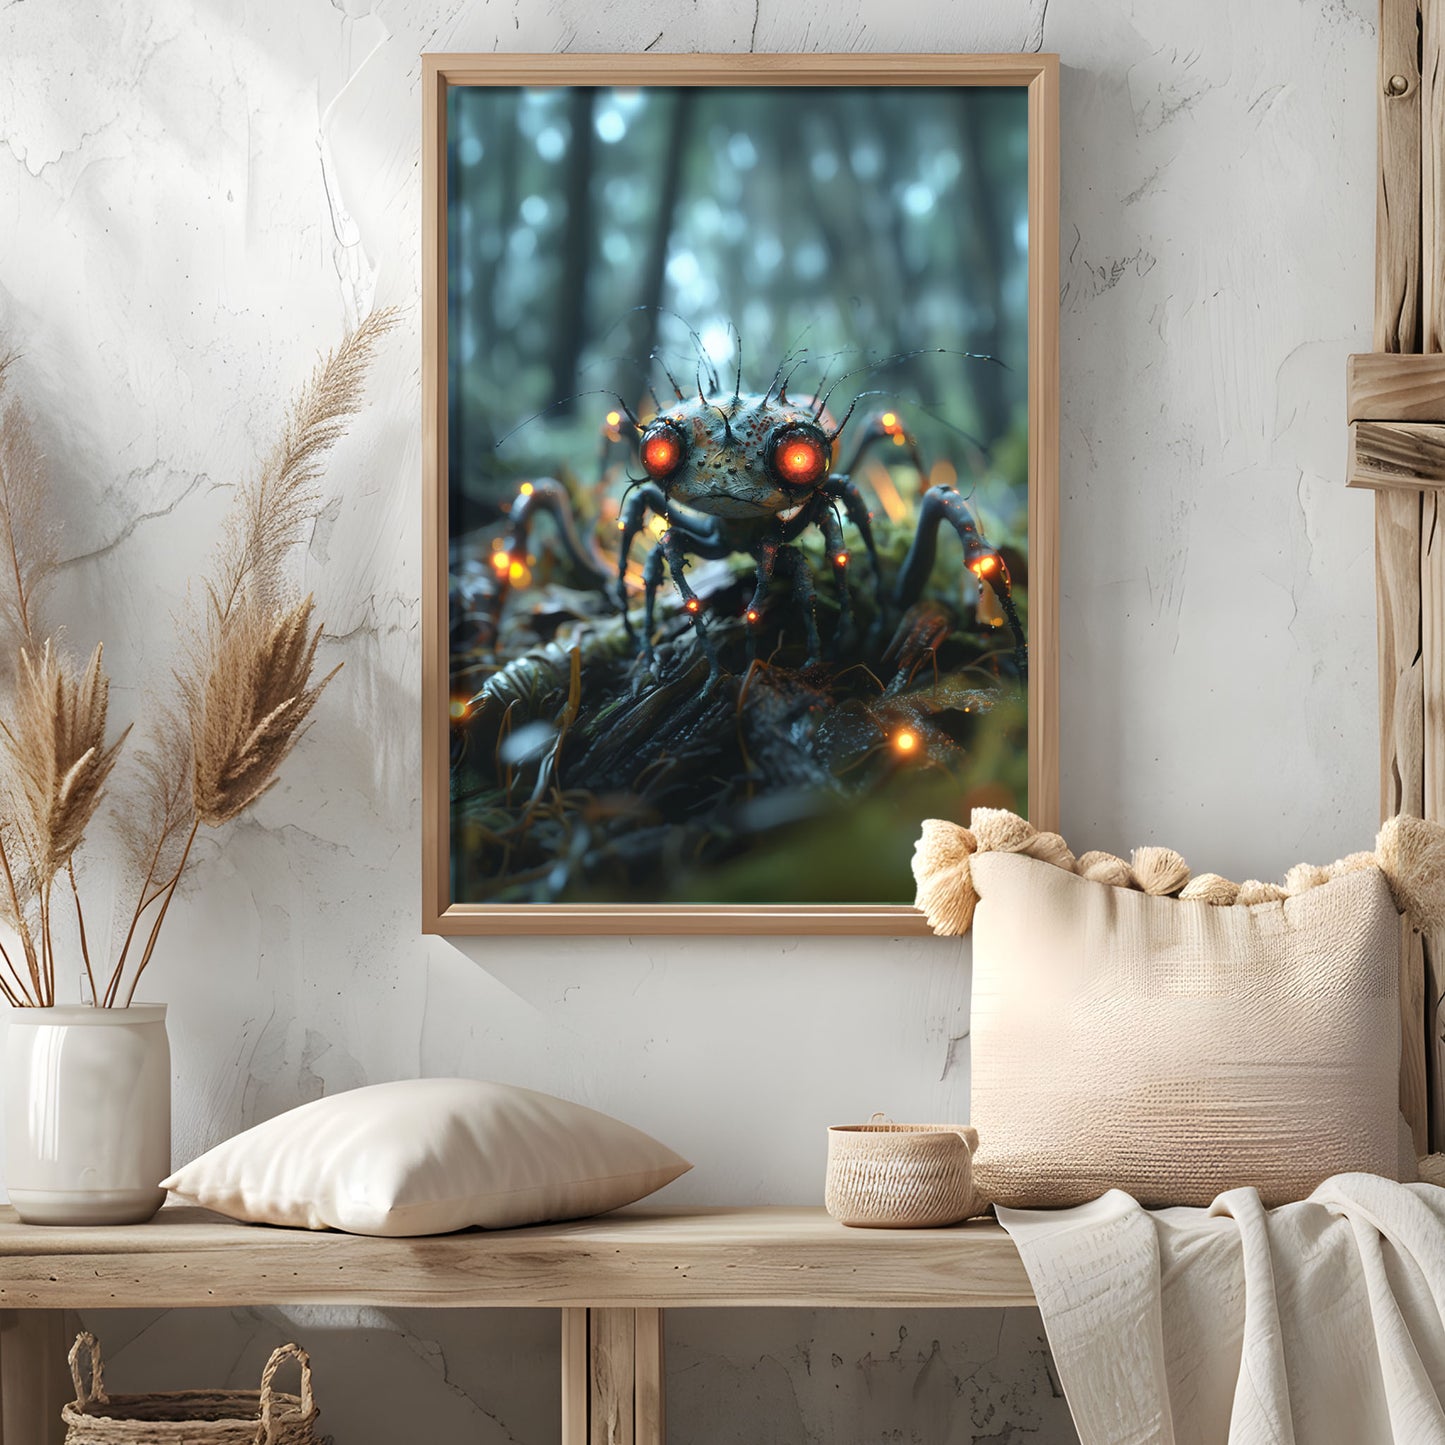 Glowing Fantasy Creature in the Woods - Creepy Gothic Wall Decor